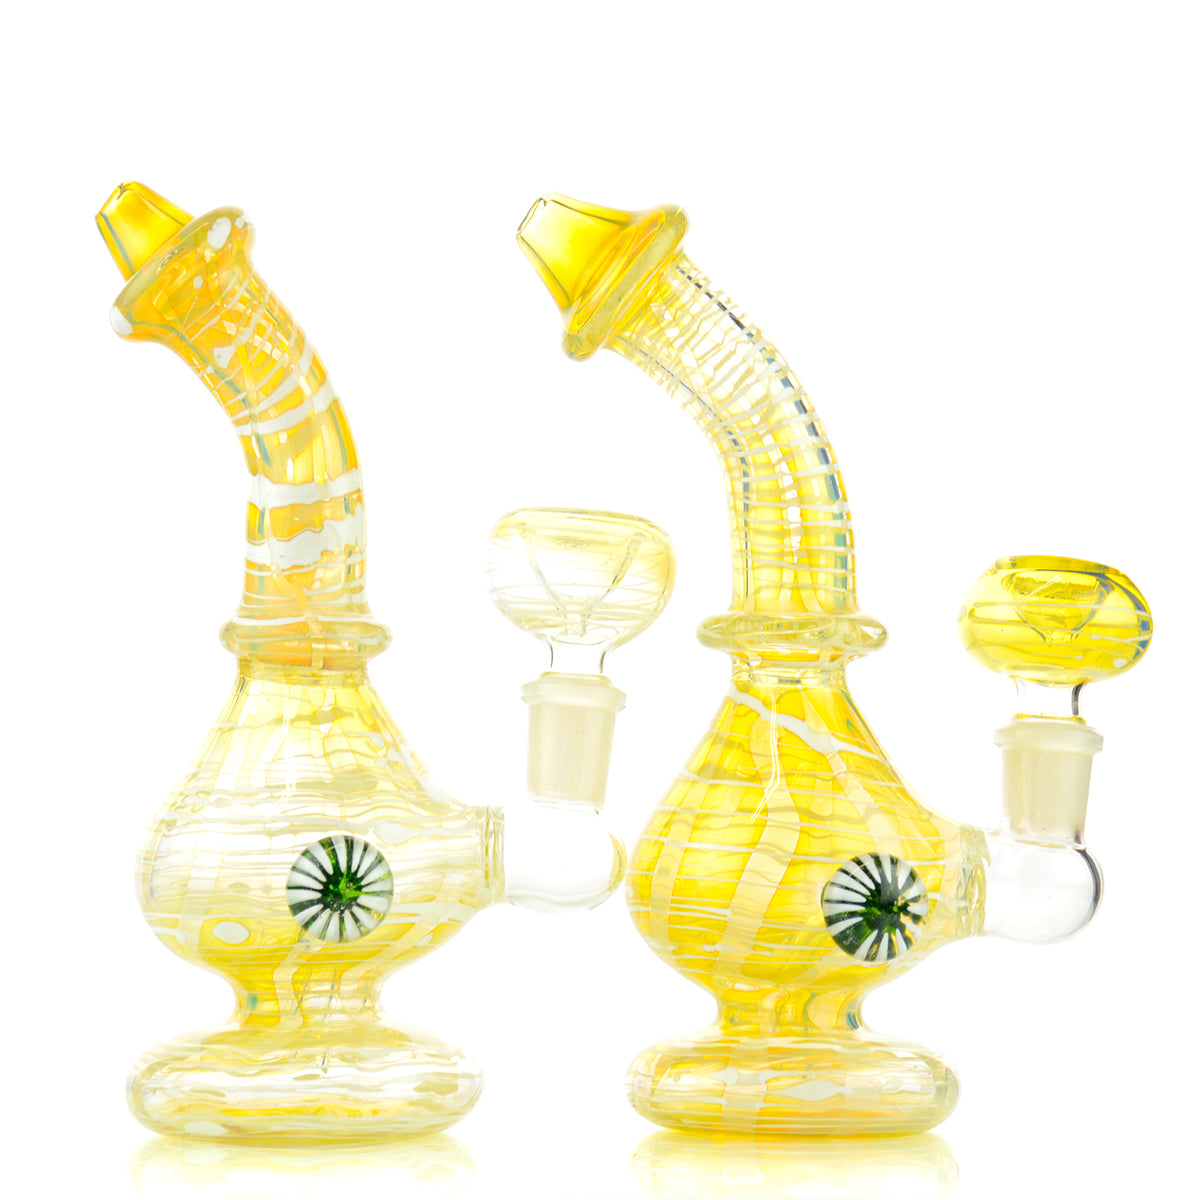 7" Gold Fume Bong with White Lines 14mm Male Bowl Included Approx 240 Grams - LA Wholesale Kings